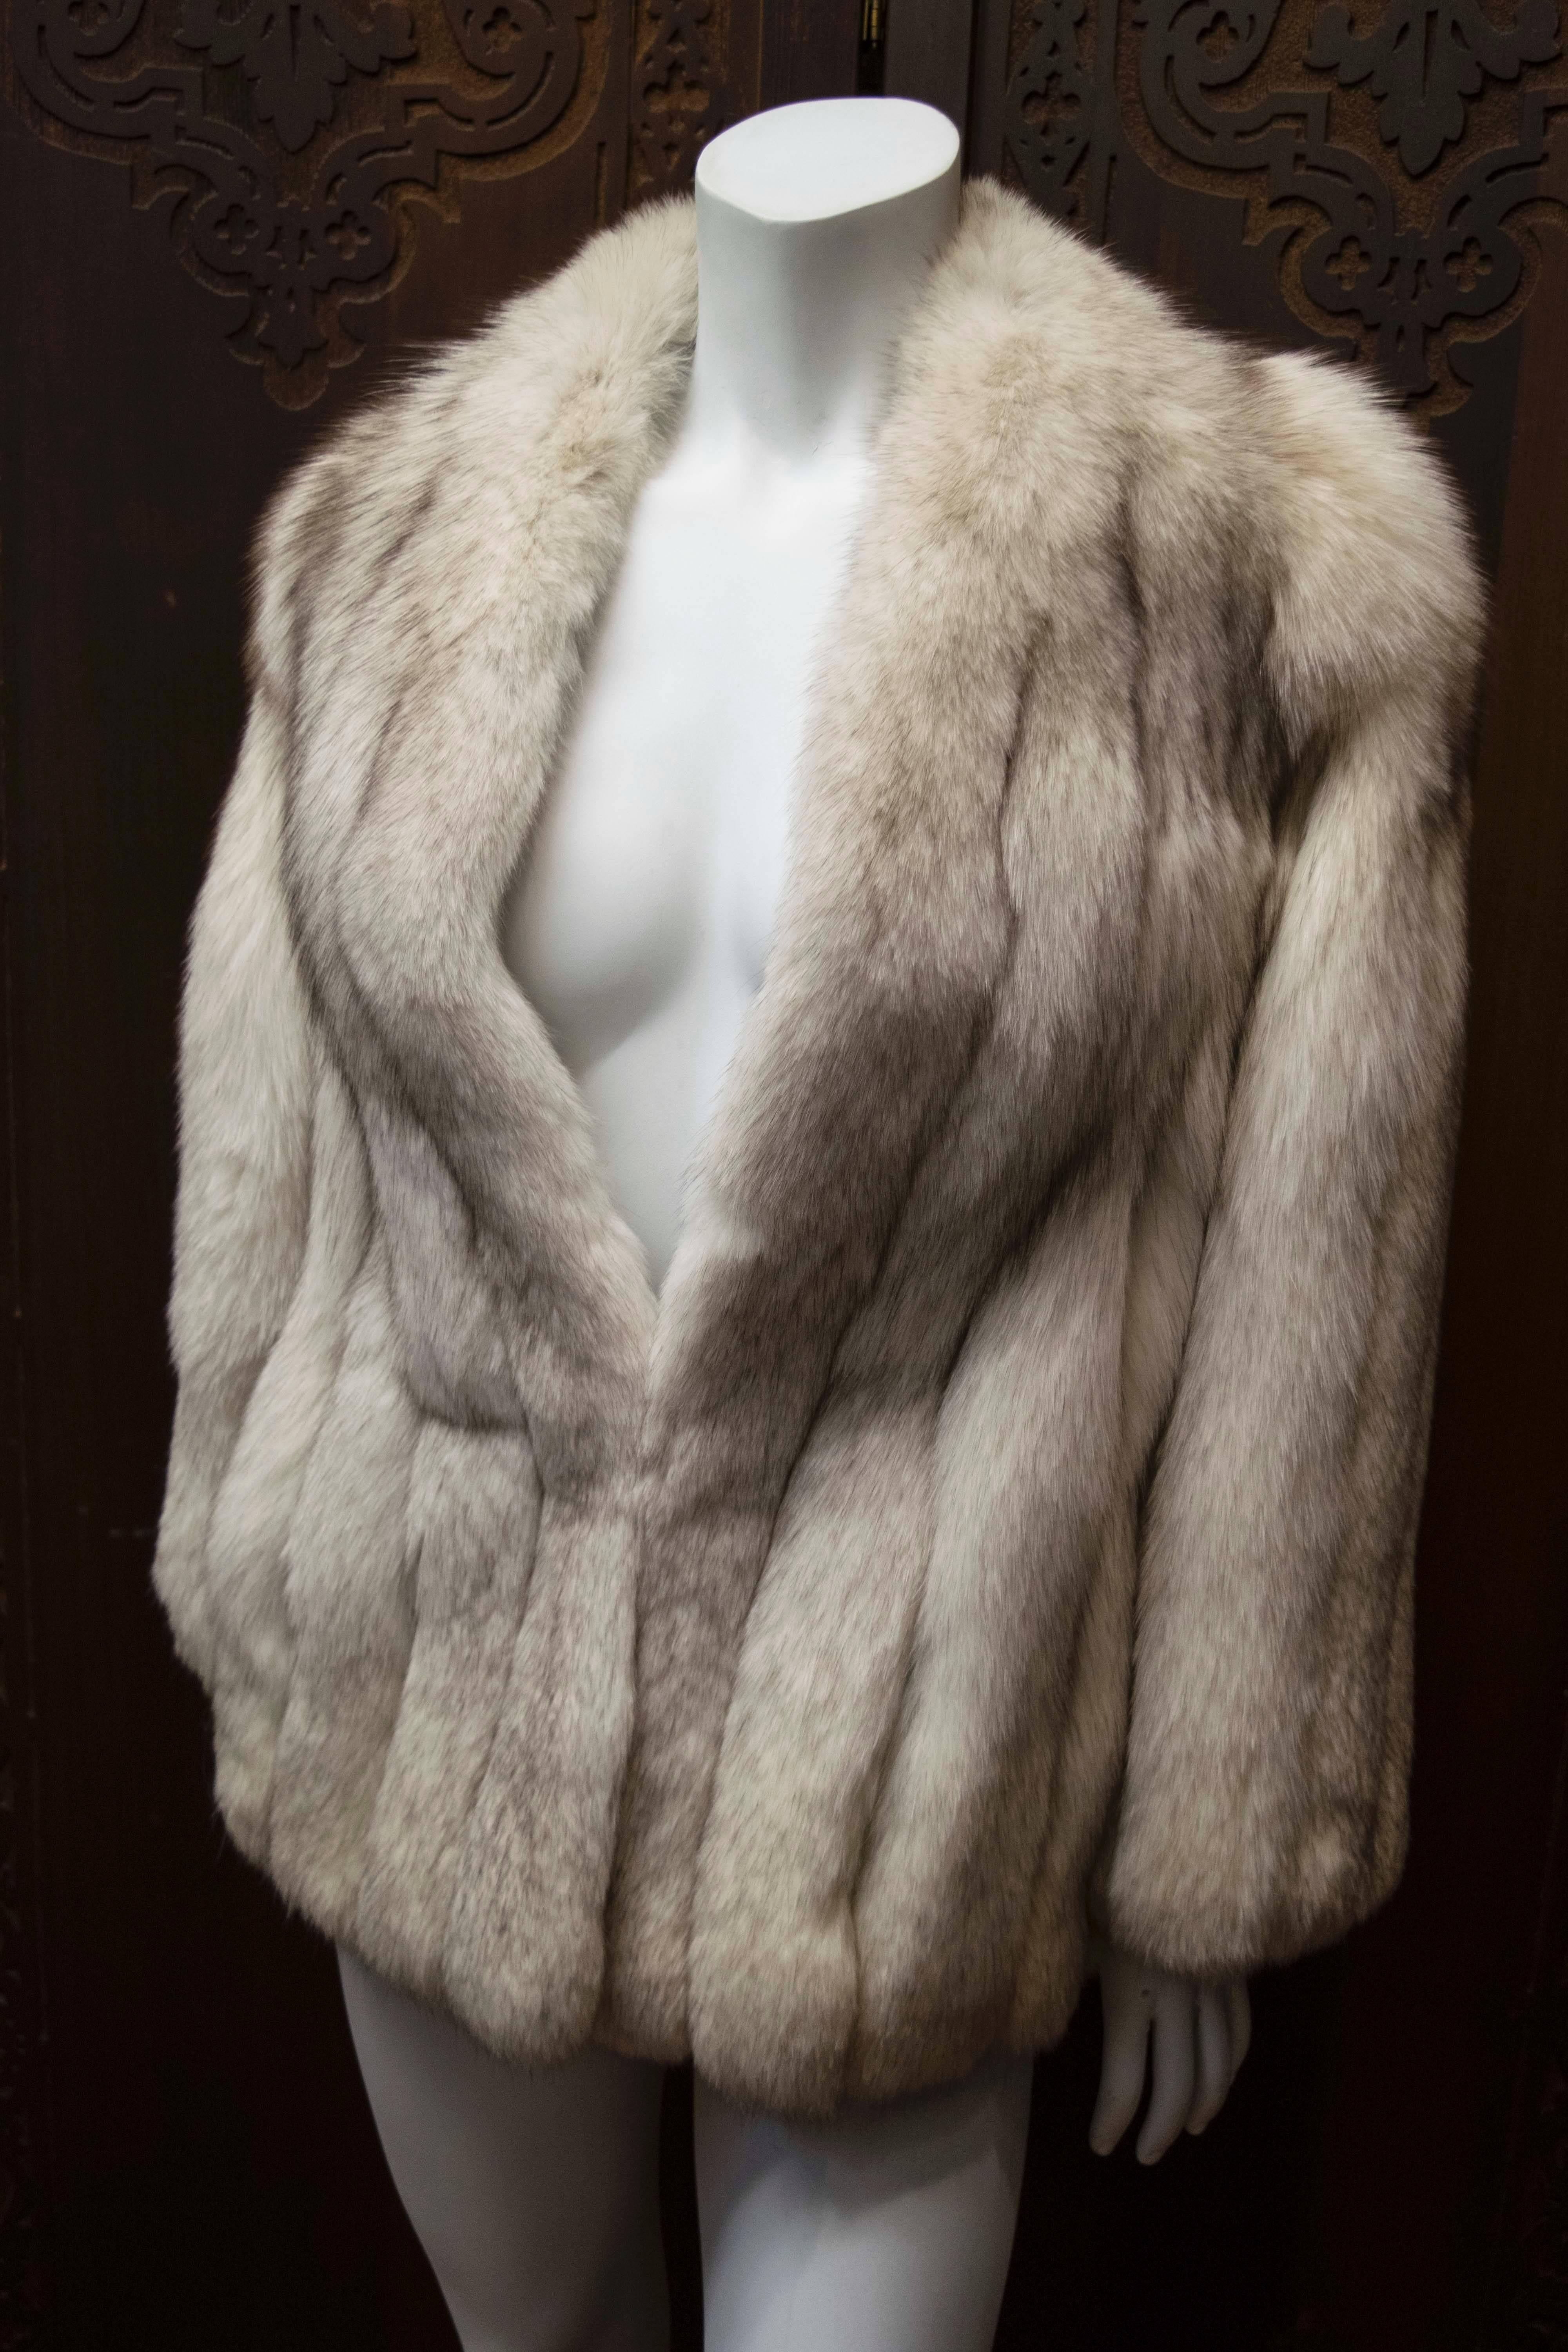 1980s White Fox Fur Coat.

Gorgeous white fox fur jacket, in excellent condition with scalloped hem and leather inserts.  

B 40
W 38
H 44
L 28